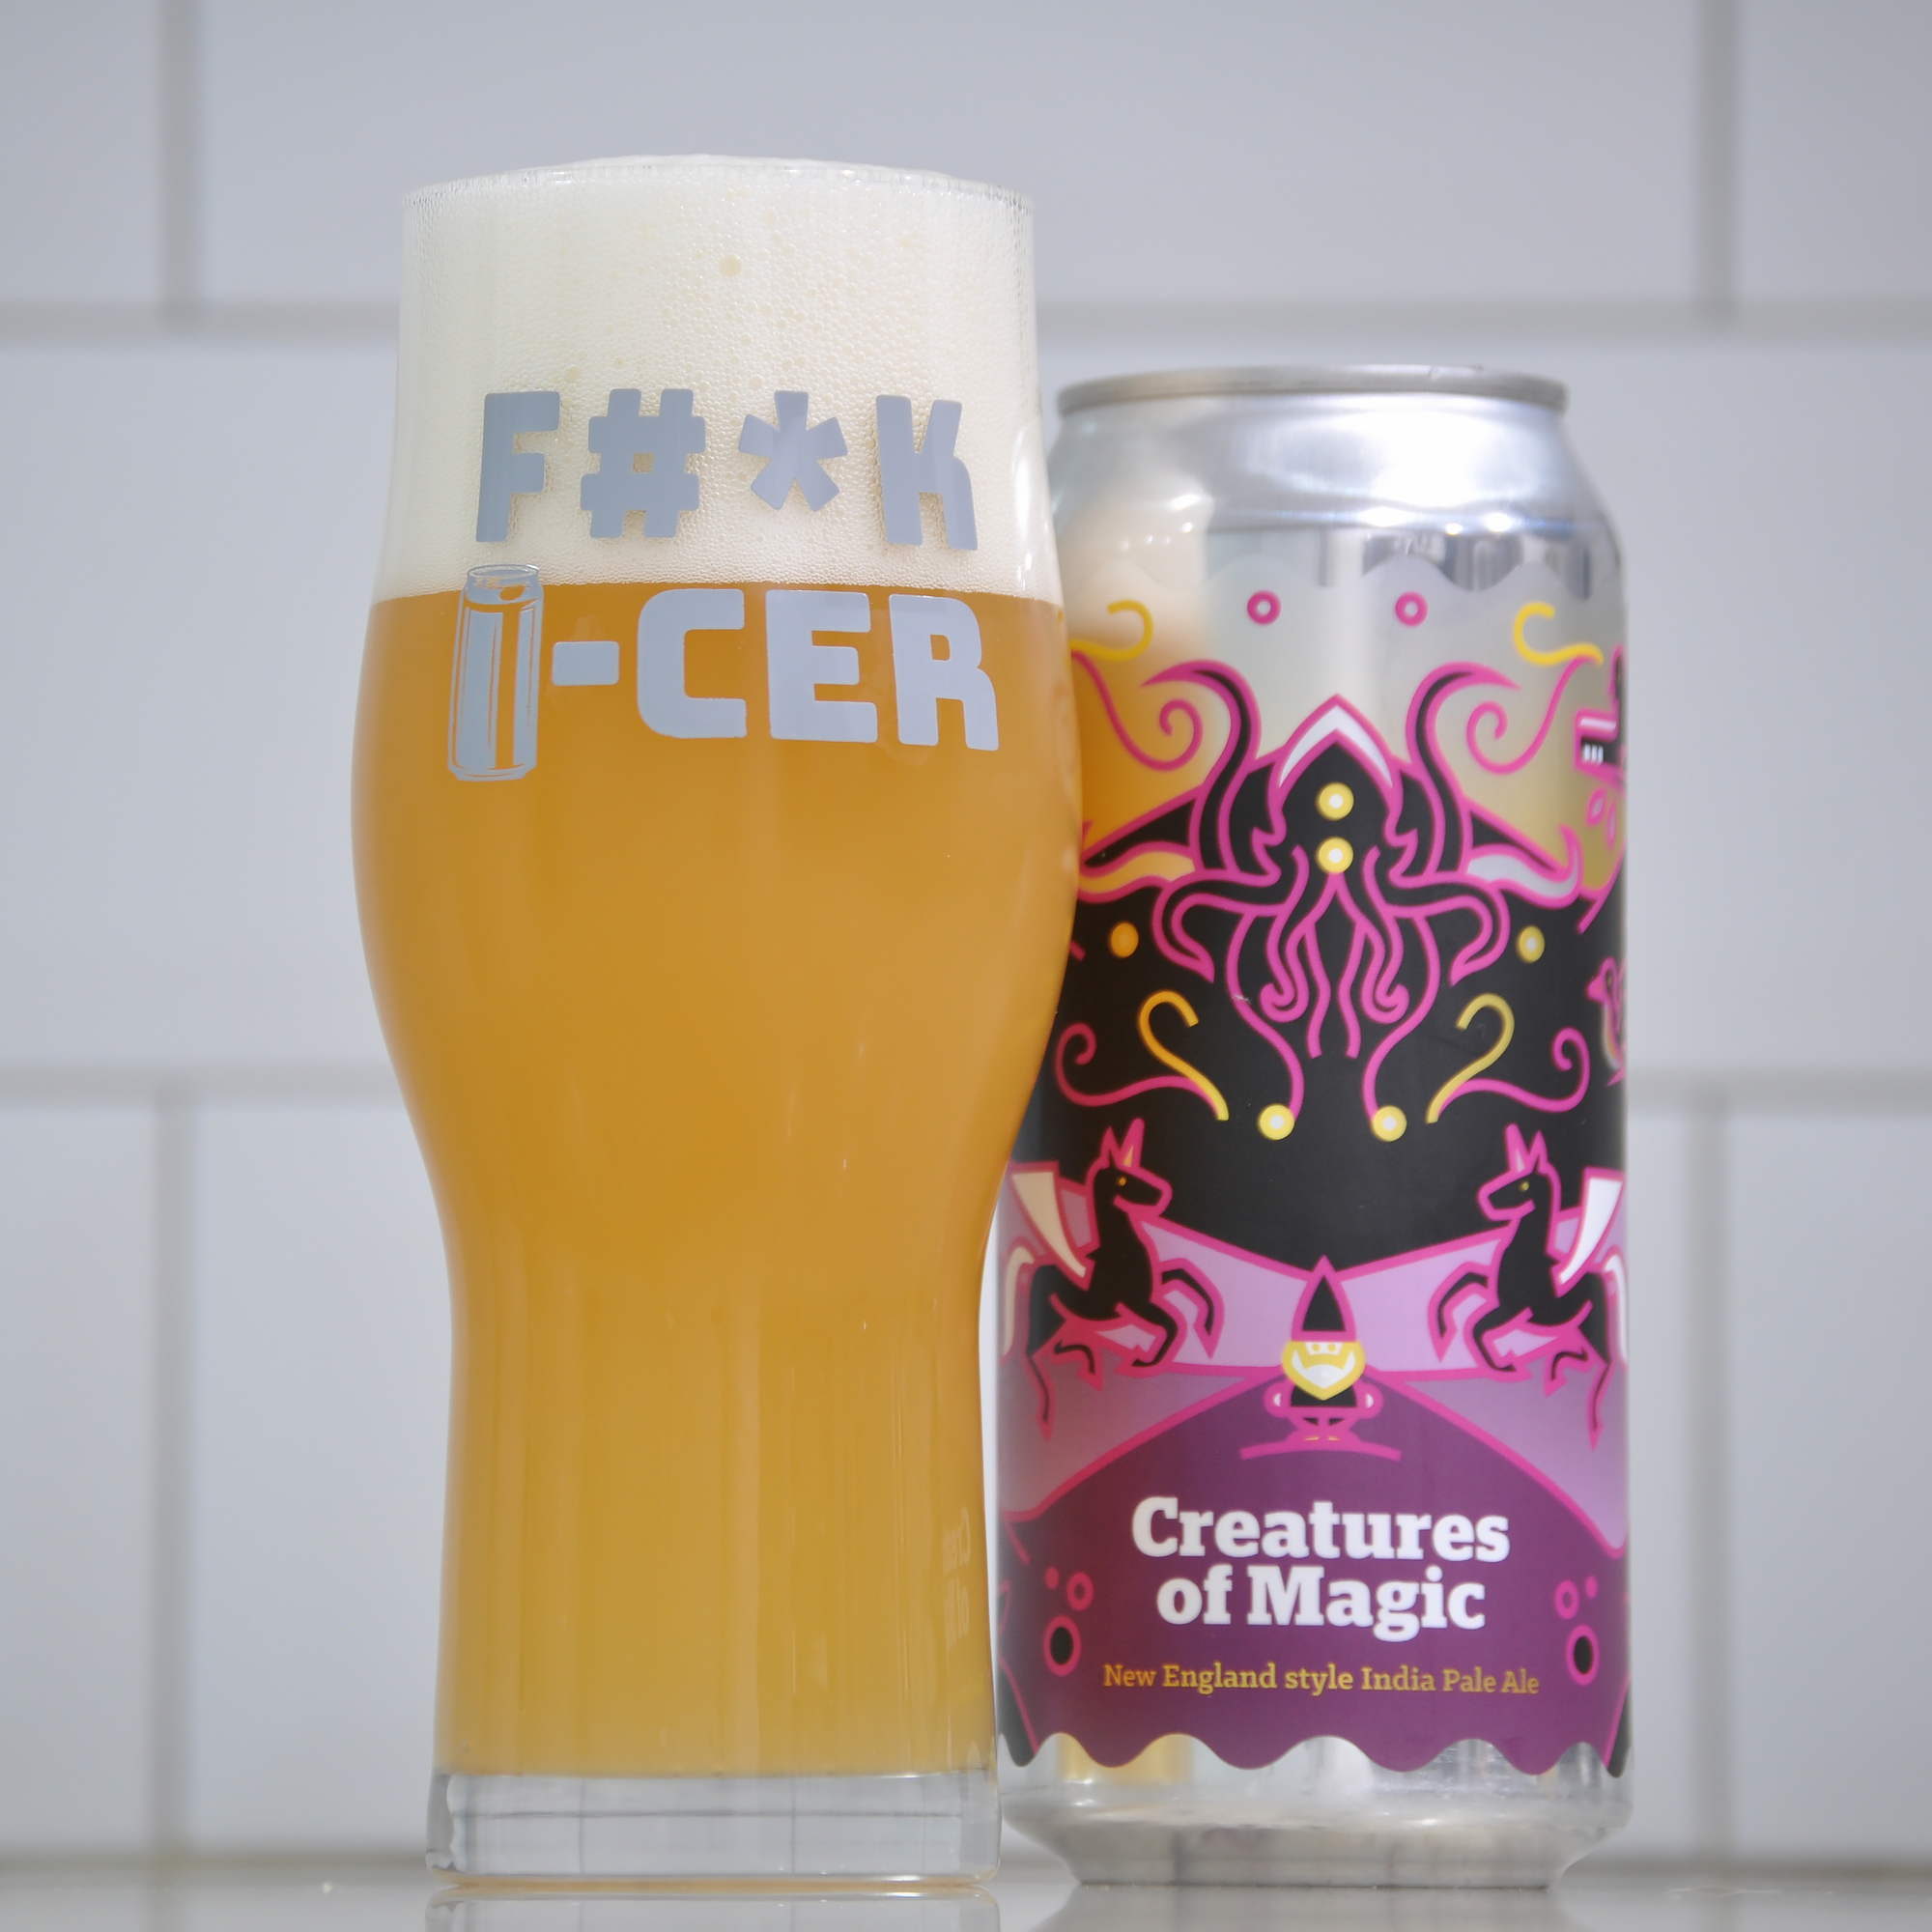 Best Fuck Cancer Gifts, and Best Glasswar for Craft Beer, and Best Charity Beer Glasses